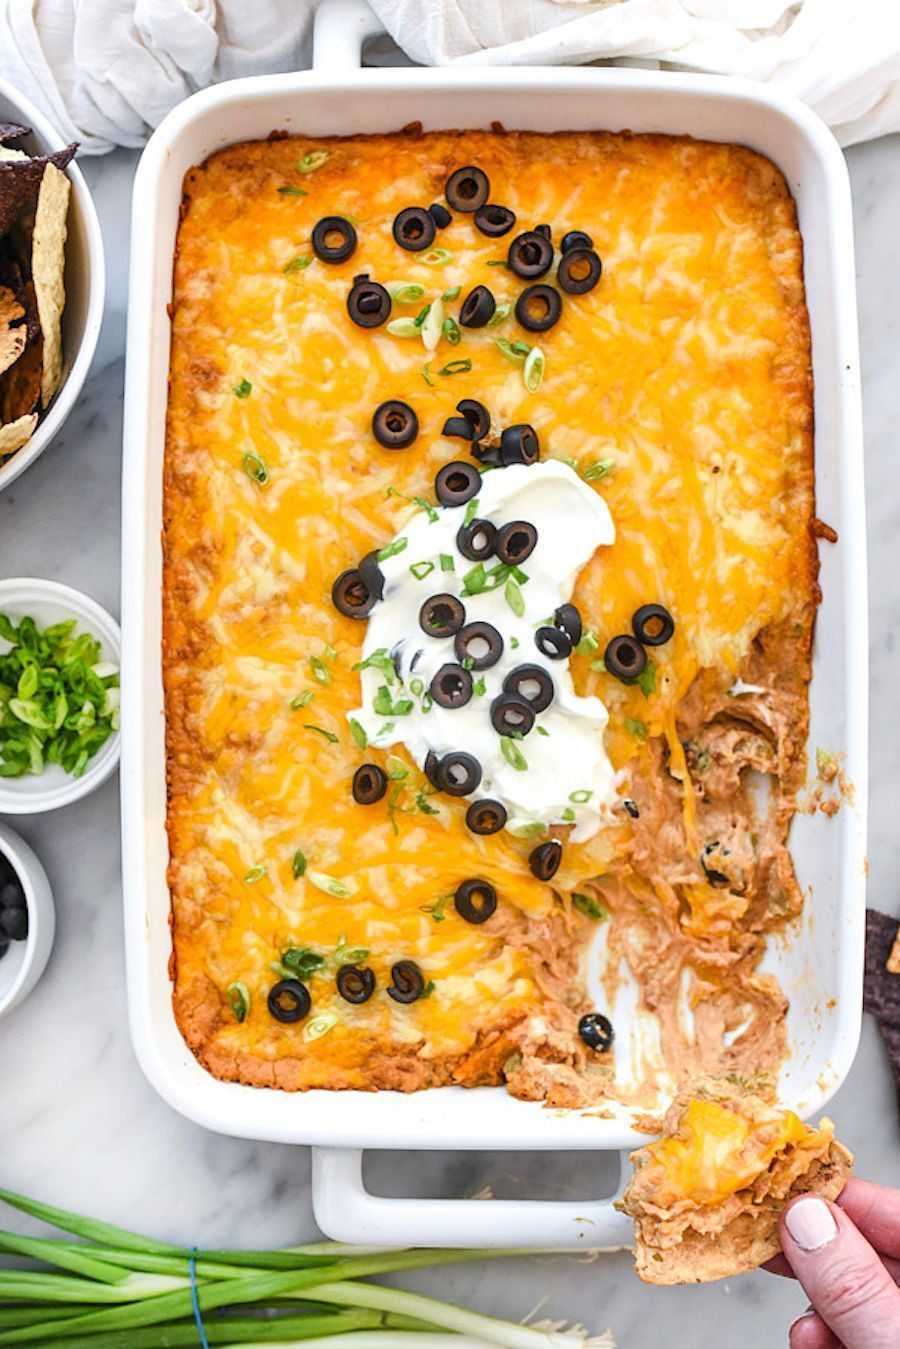 Mexican Super Bowl Recipes
 16 Super Bowl Recipes for the Whole Family